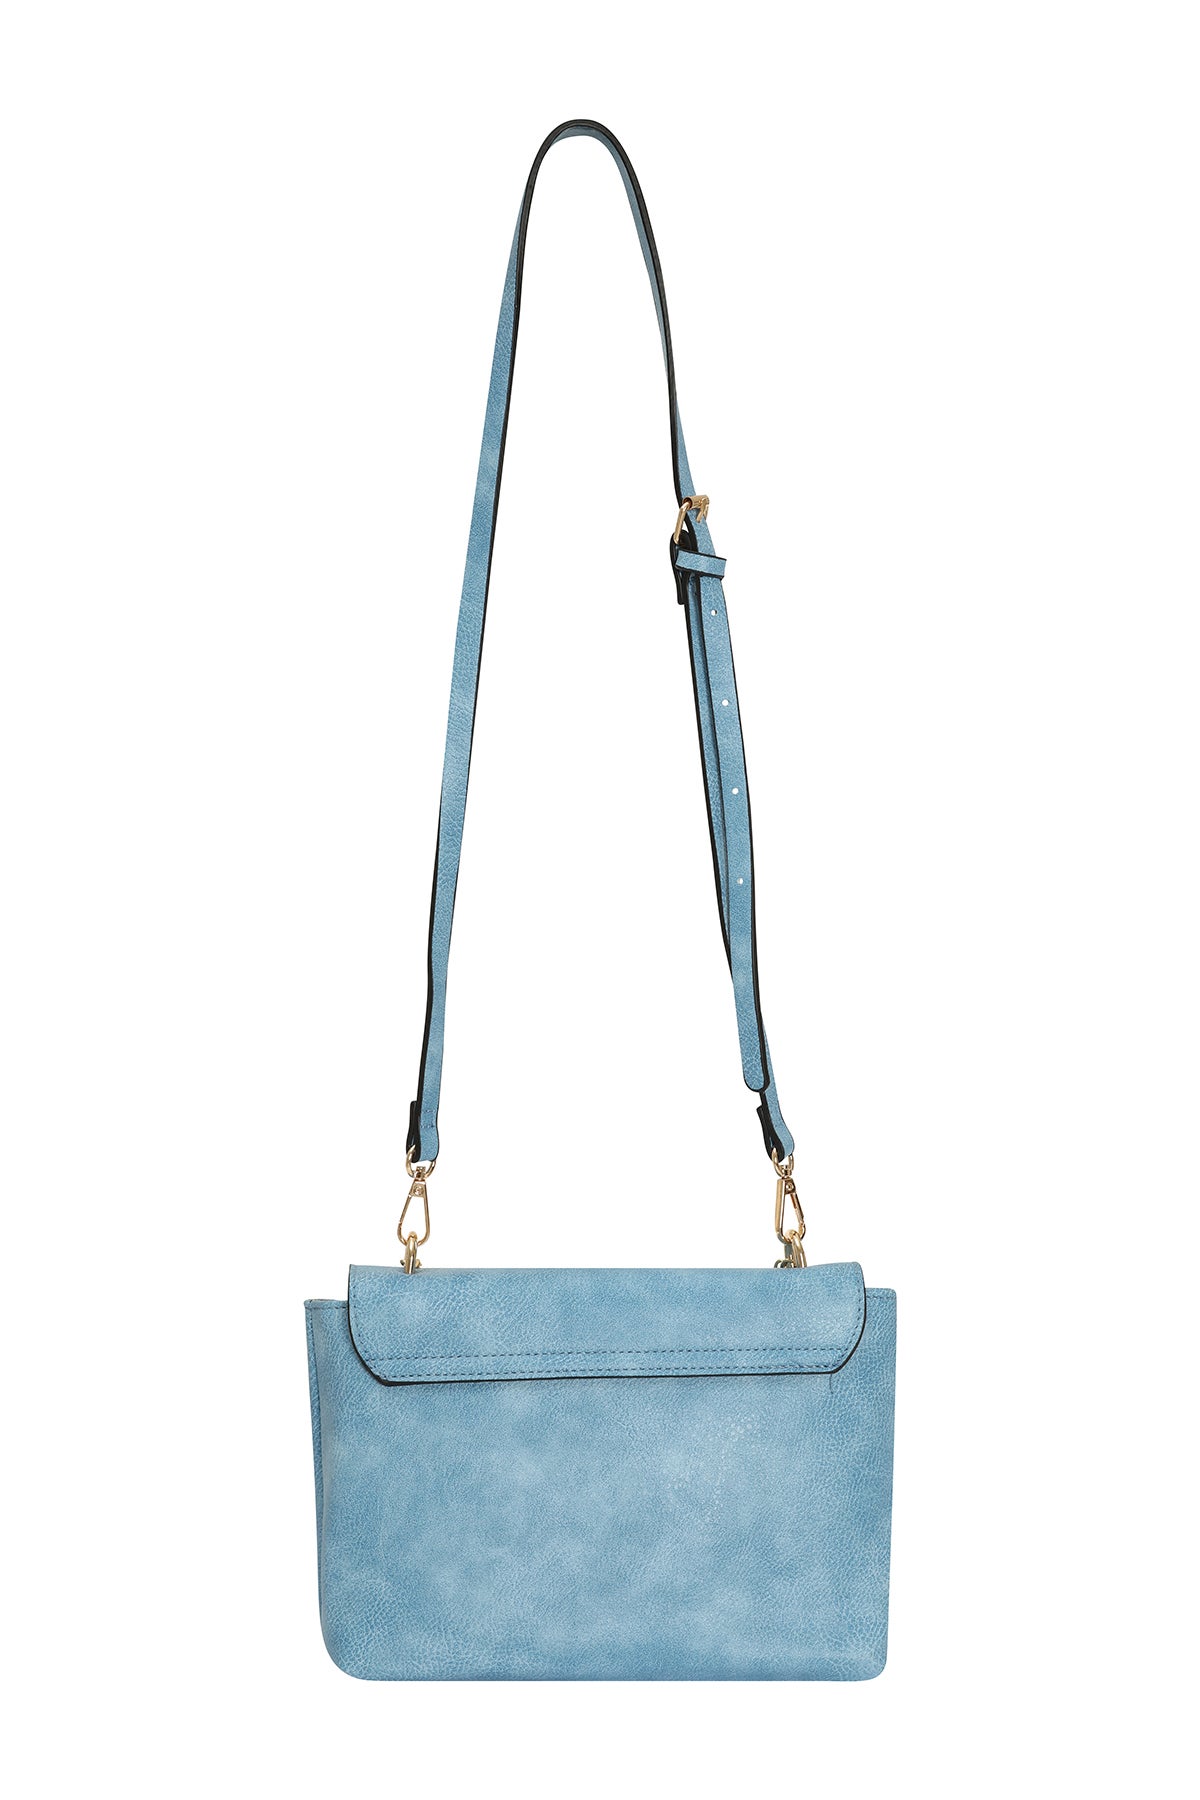 Emmy London Natasha Clutch in Duck Egg Blue Suede - Kate Middleton Bags -  Kate's Closet